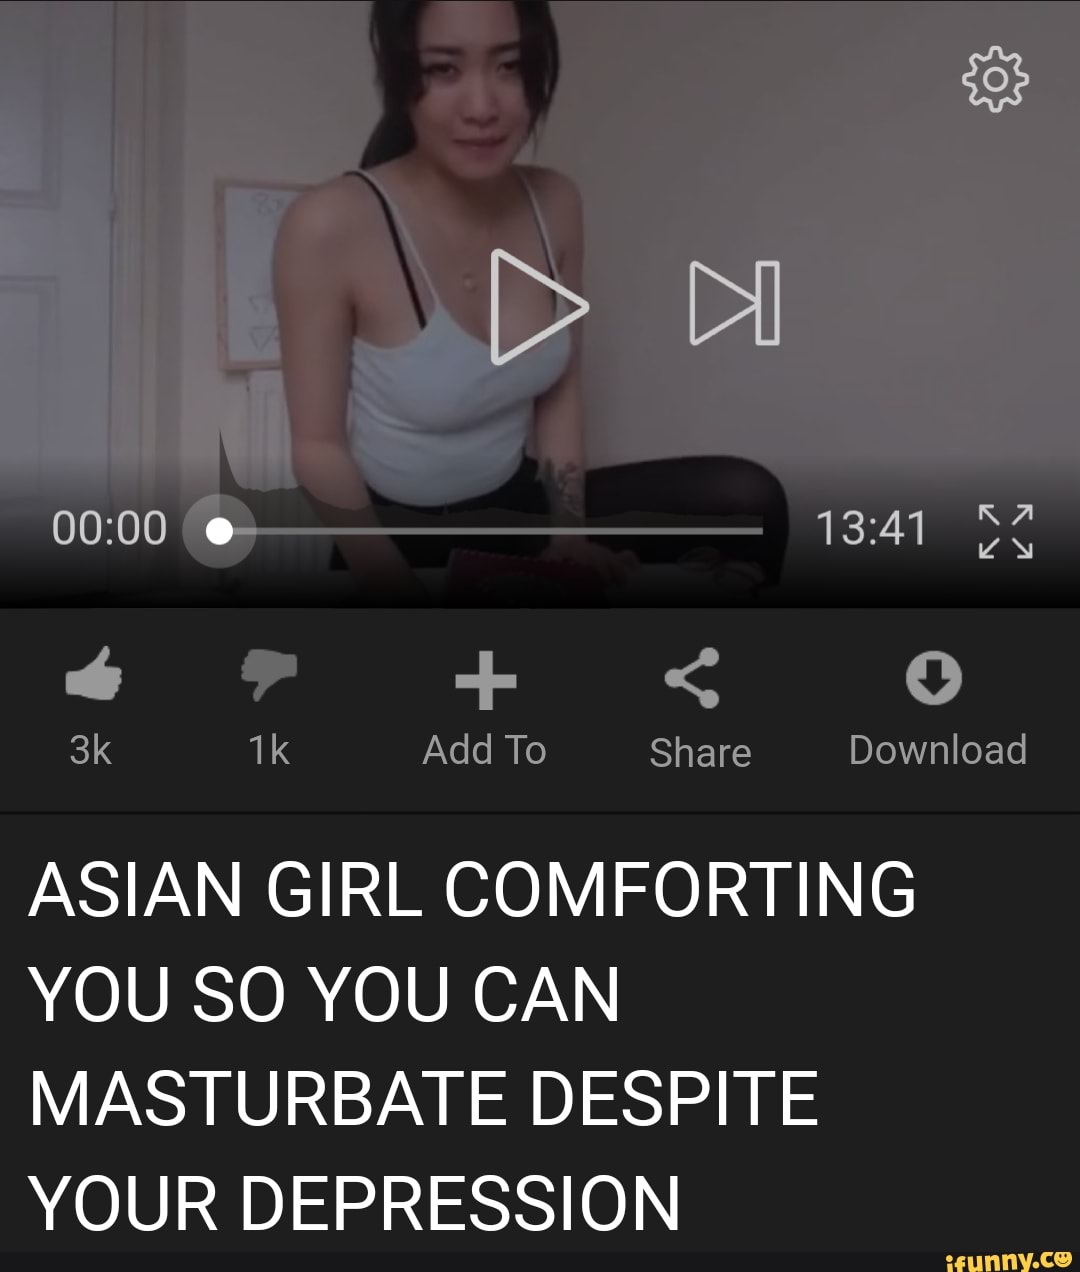 darlene breaux recommends asian girl comforting you pic